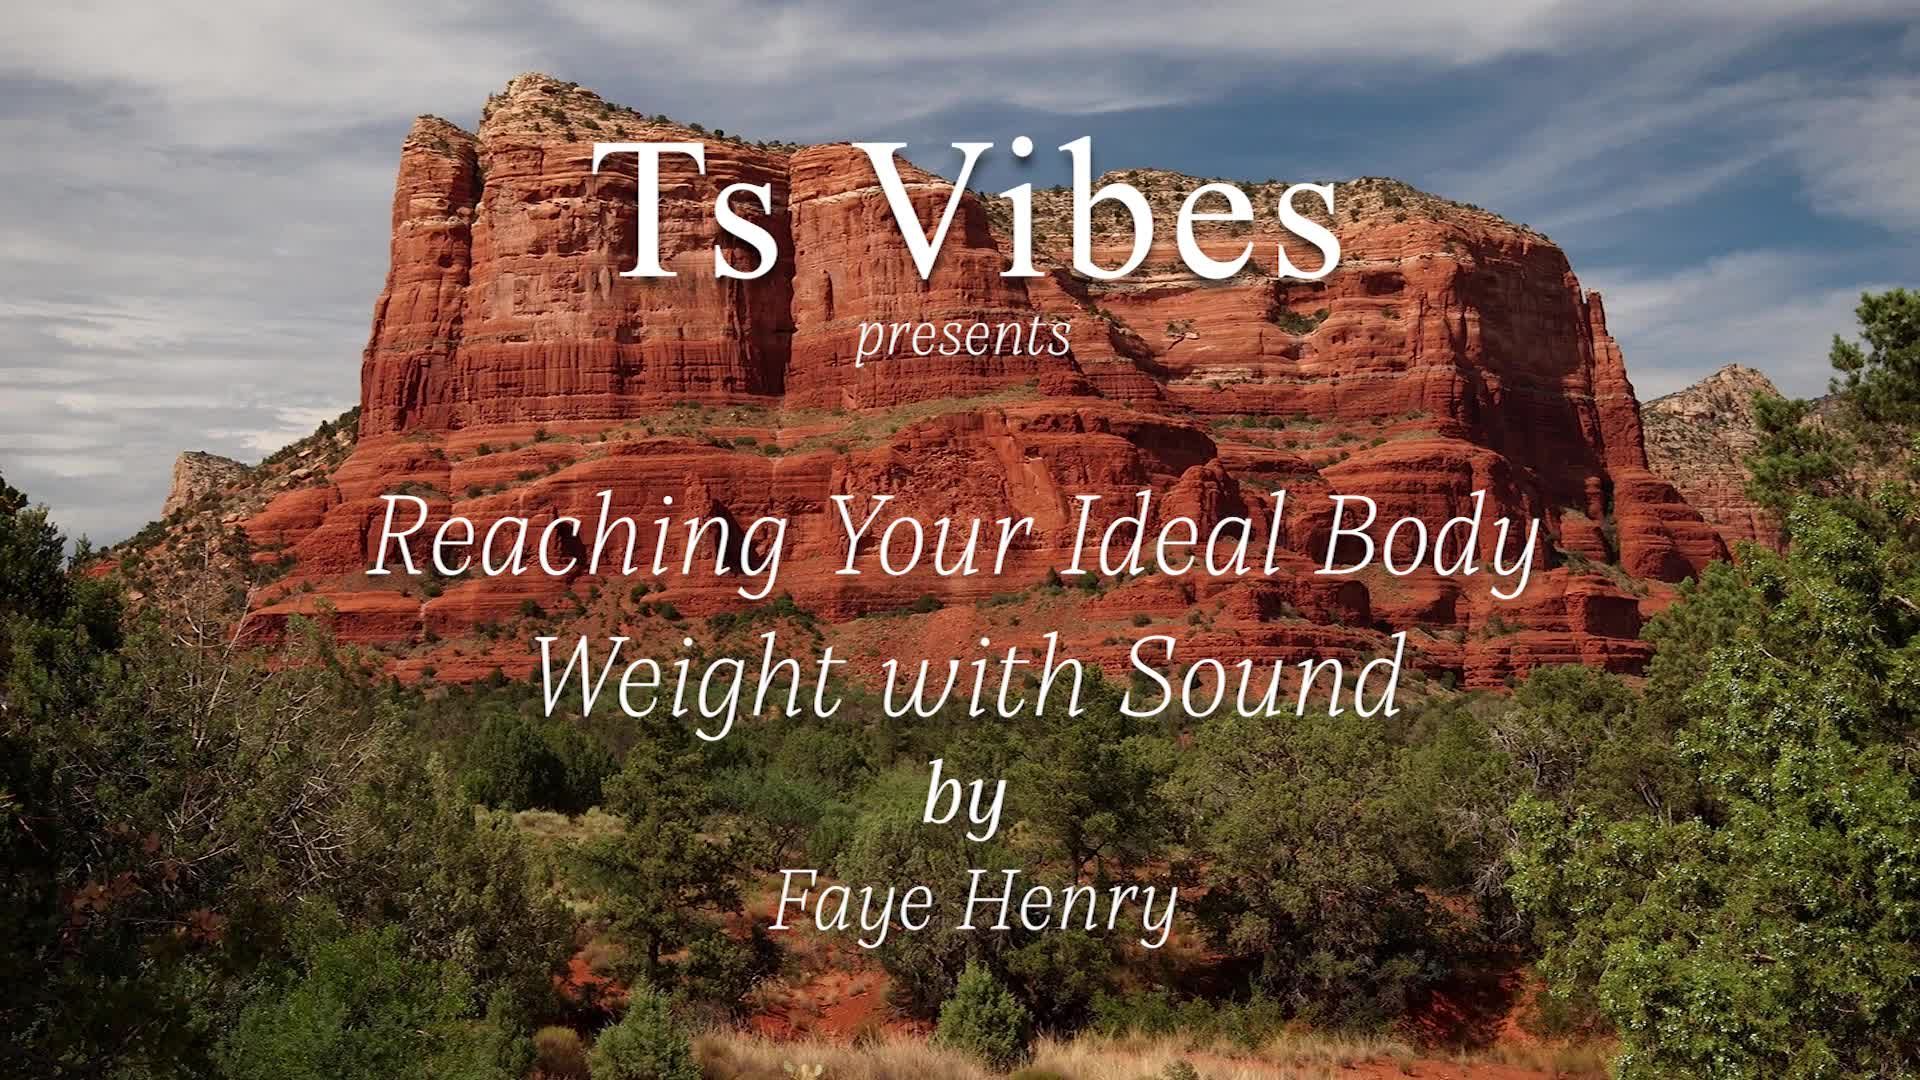 Using Sound to Reach Your Ideal Body Weight Rental